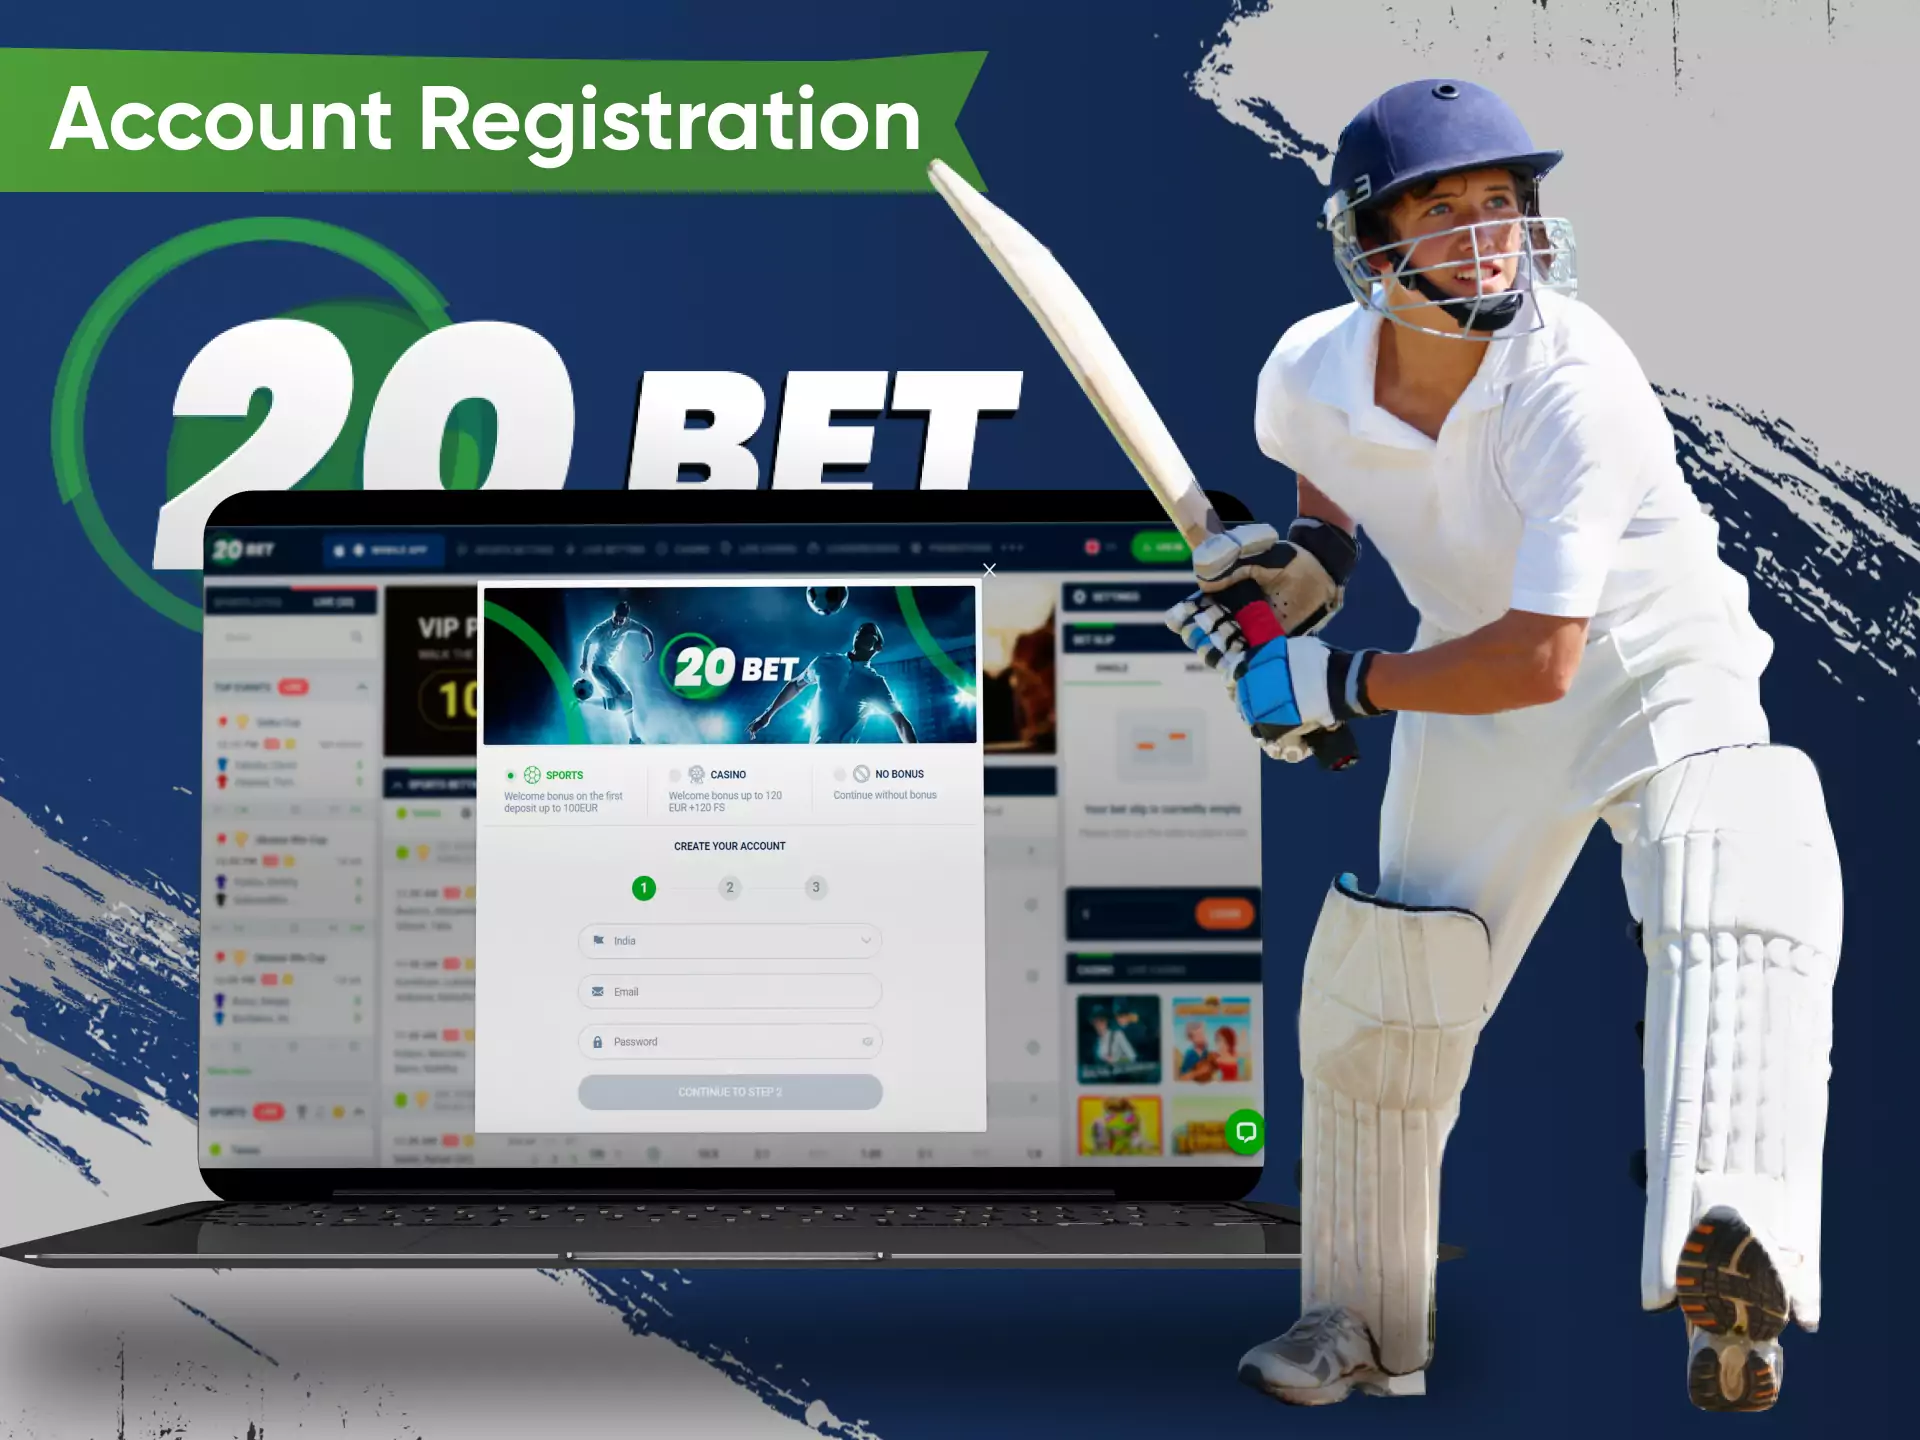 Create an account on 20bet to start betting.